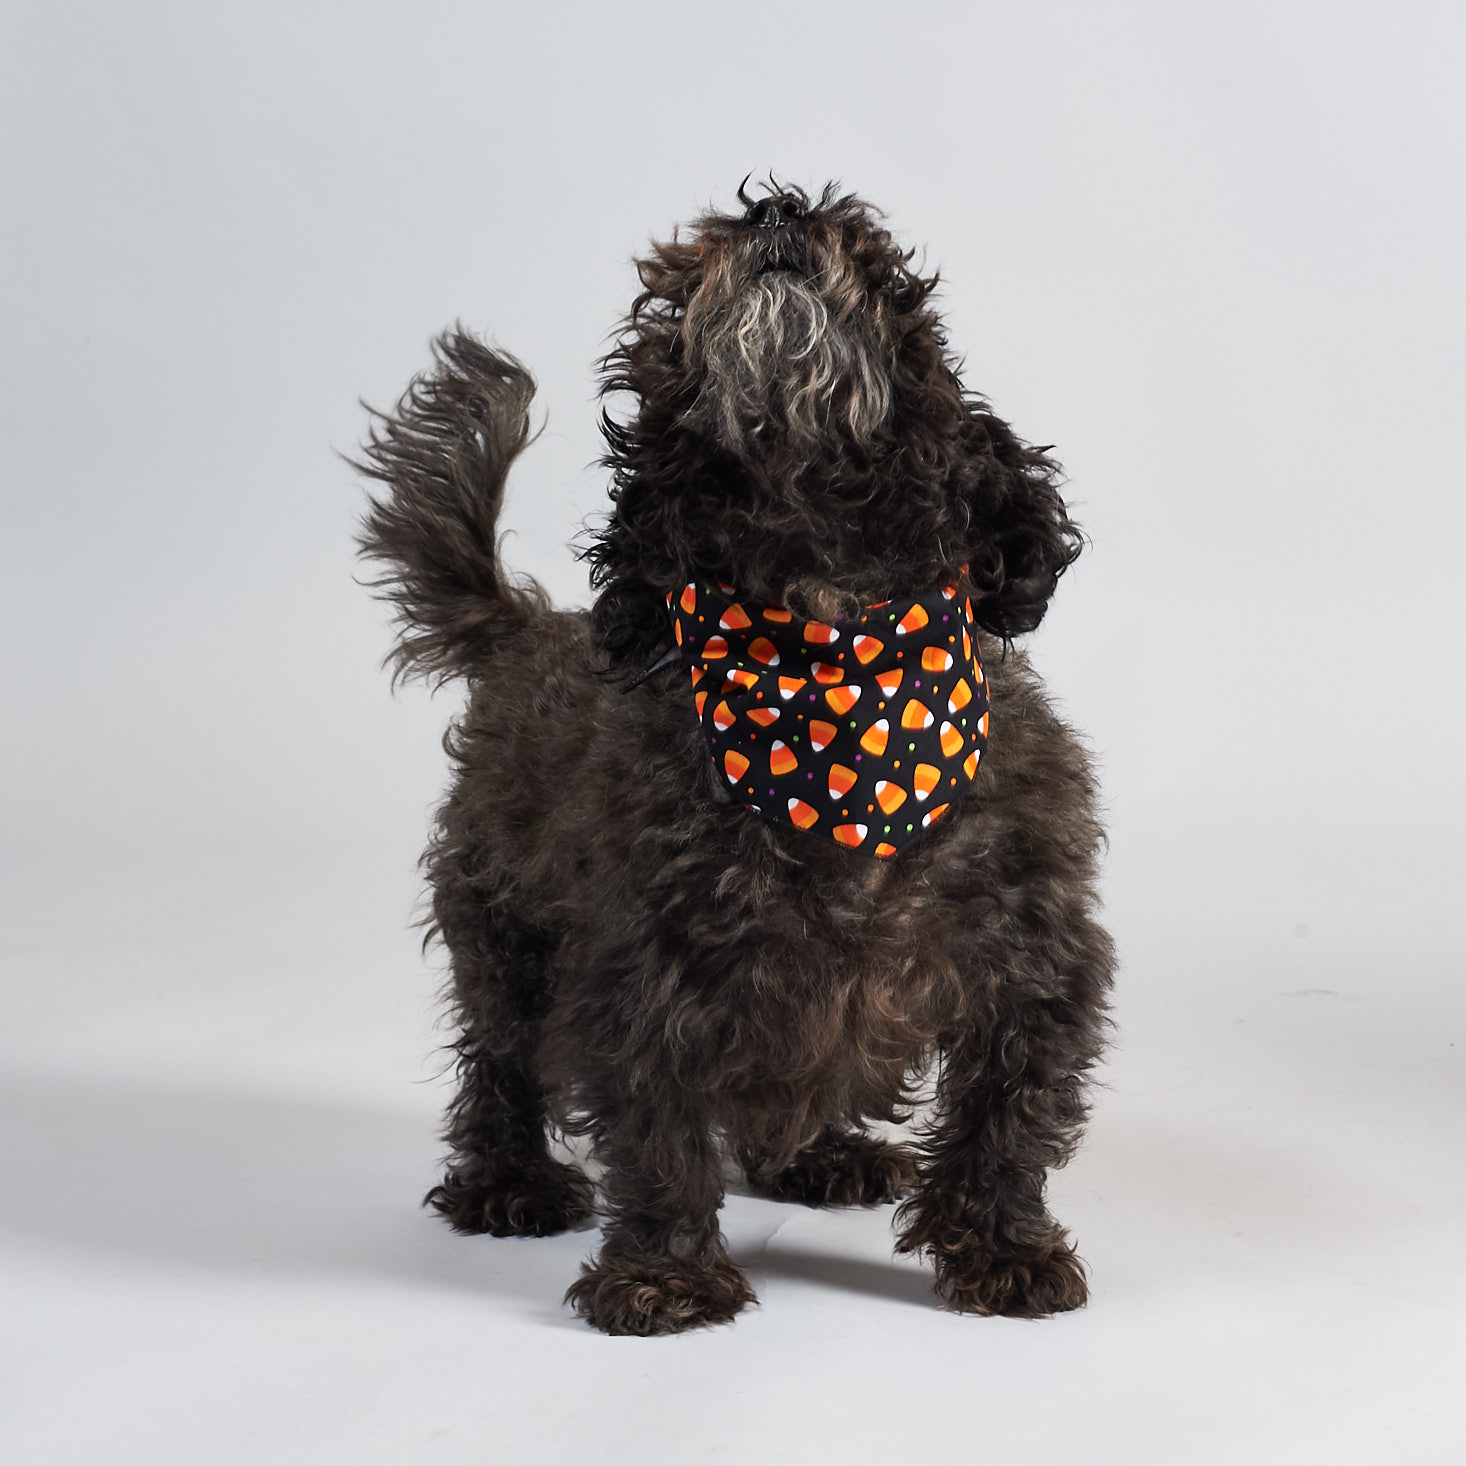 Canine Compassion Bandanas Review + First Month Free – October 2018